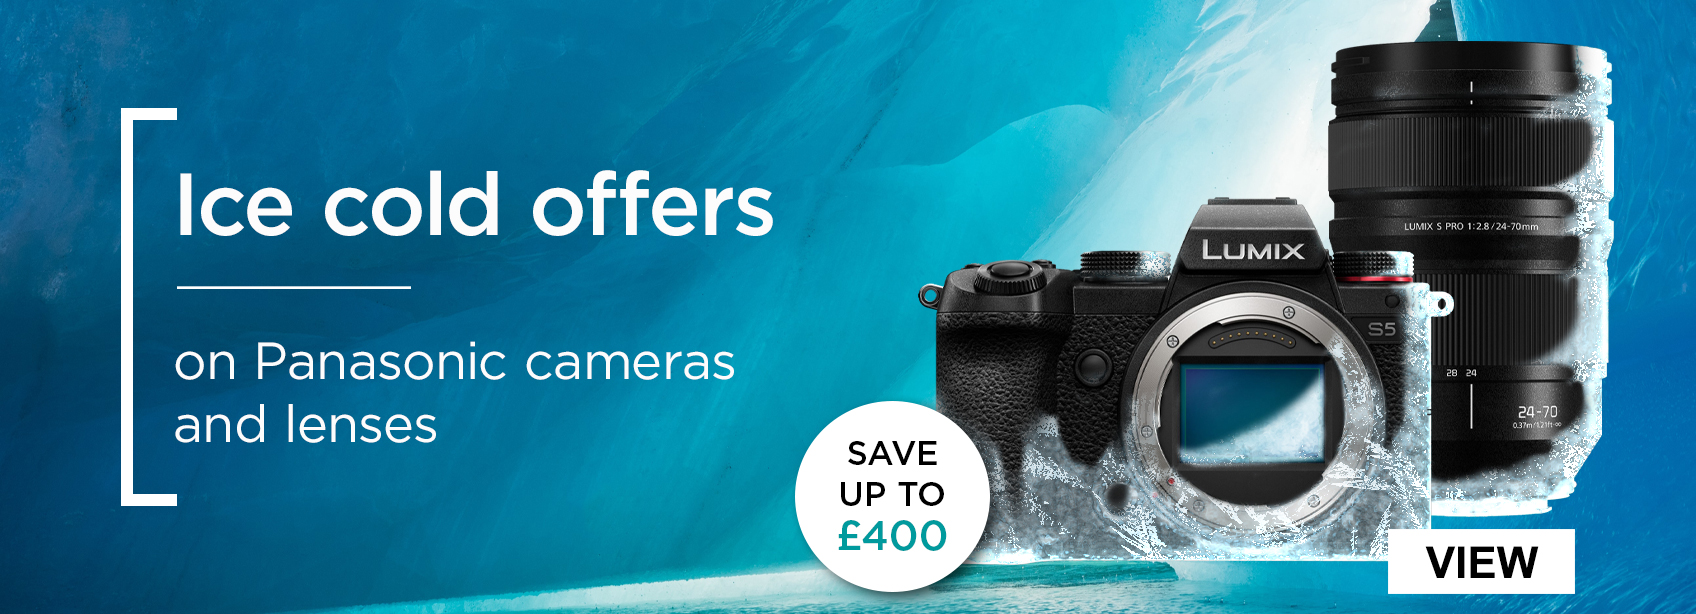 Ice cold offers on selected Panasonic cameras and lenses. Save up to £400.